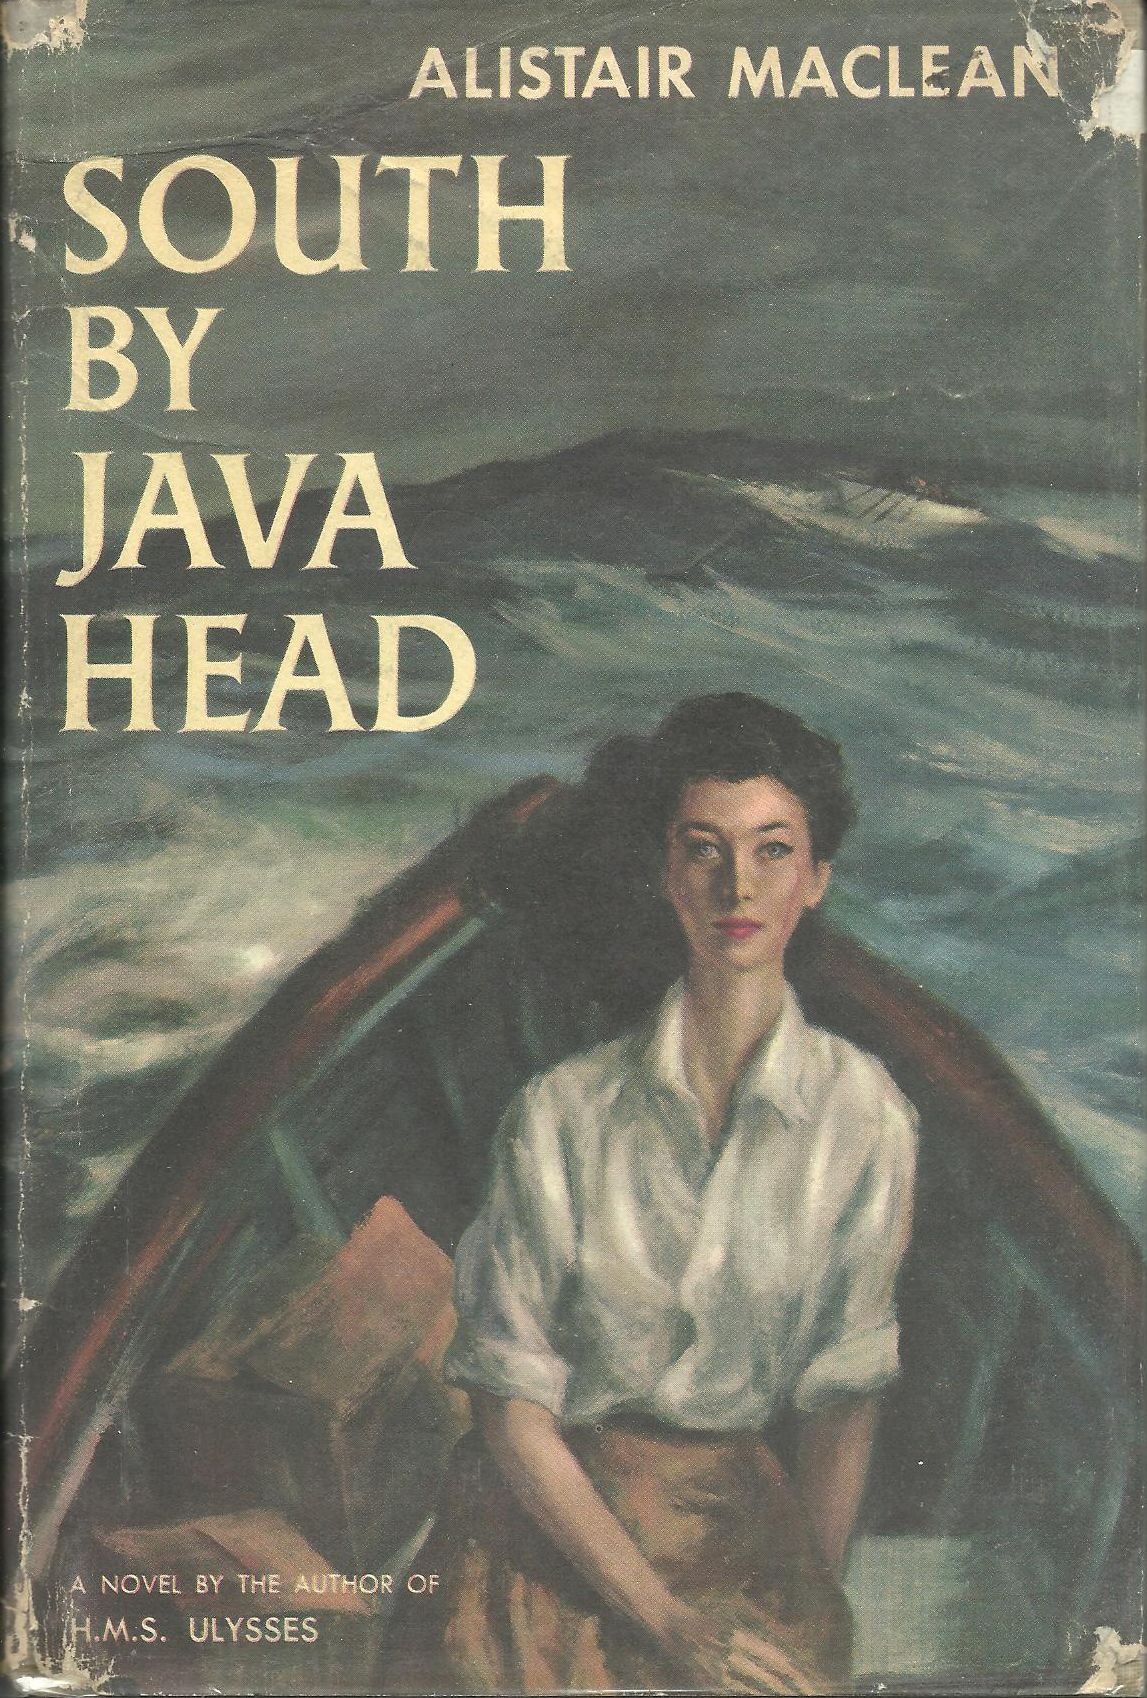 South by Java Head - US first edition